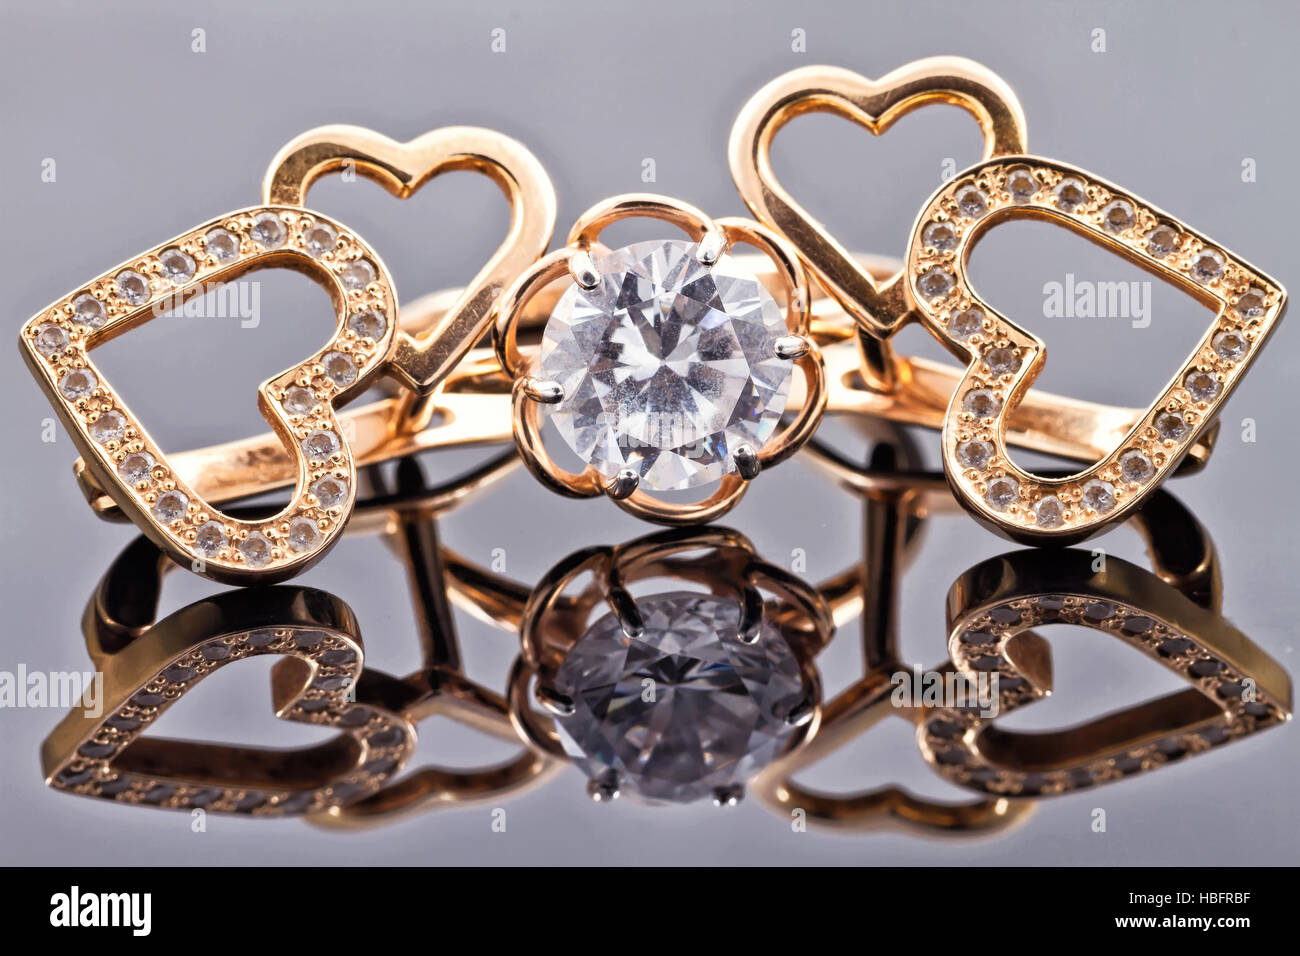 A set of gold jewelry Stock Photo